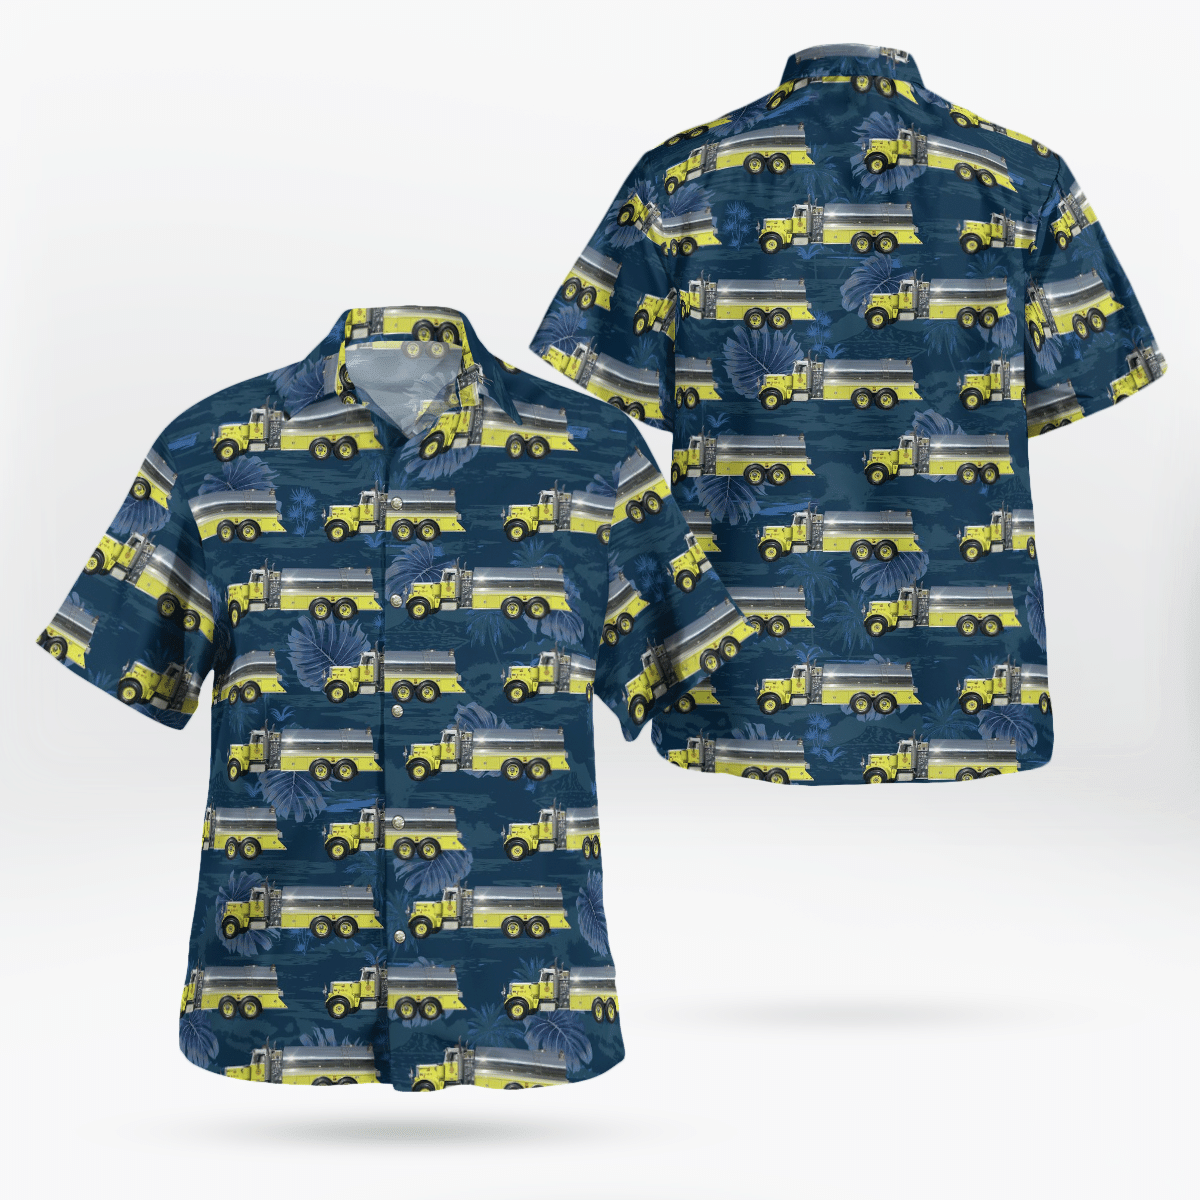 Shop now to find the perfect Hawaii Shirt for your hobby 11